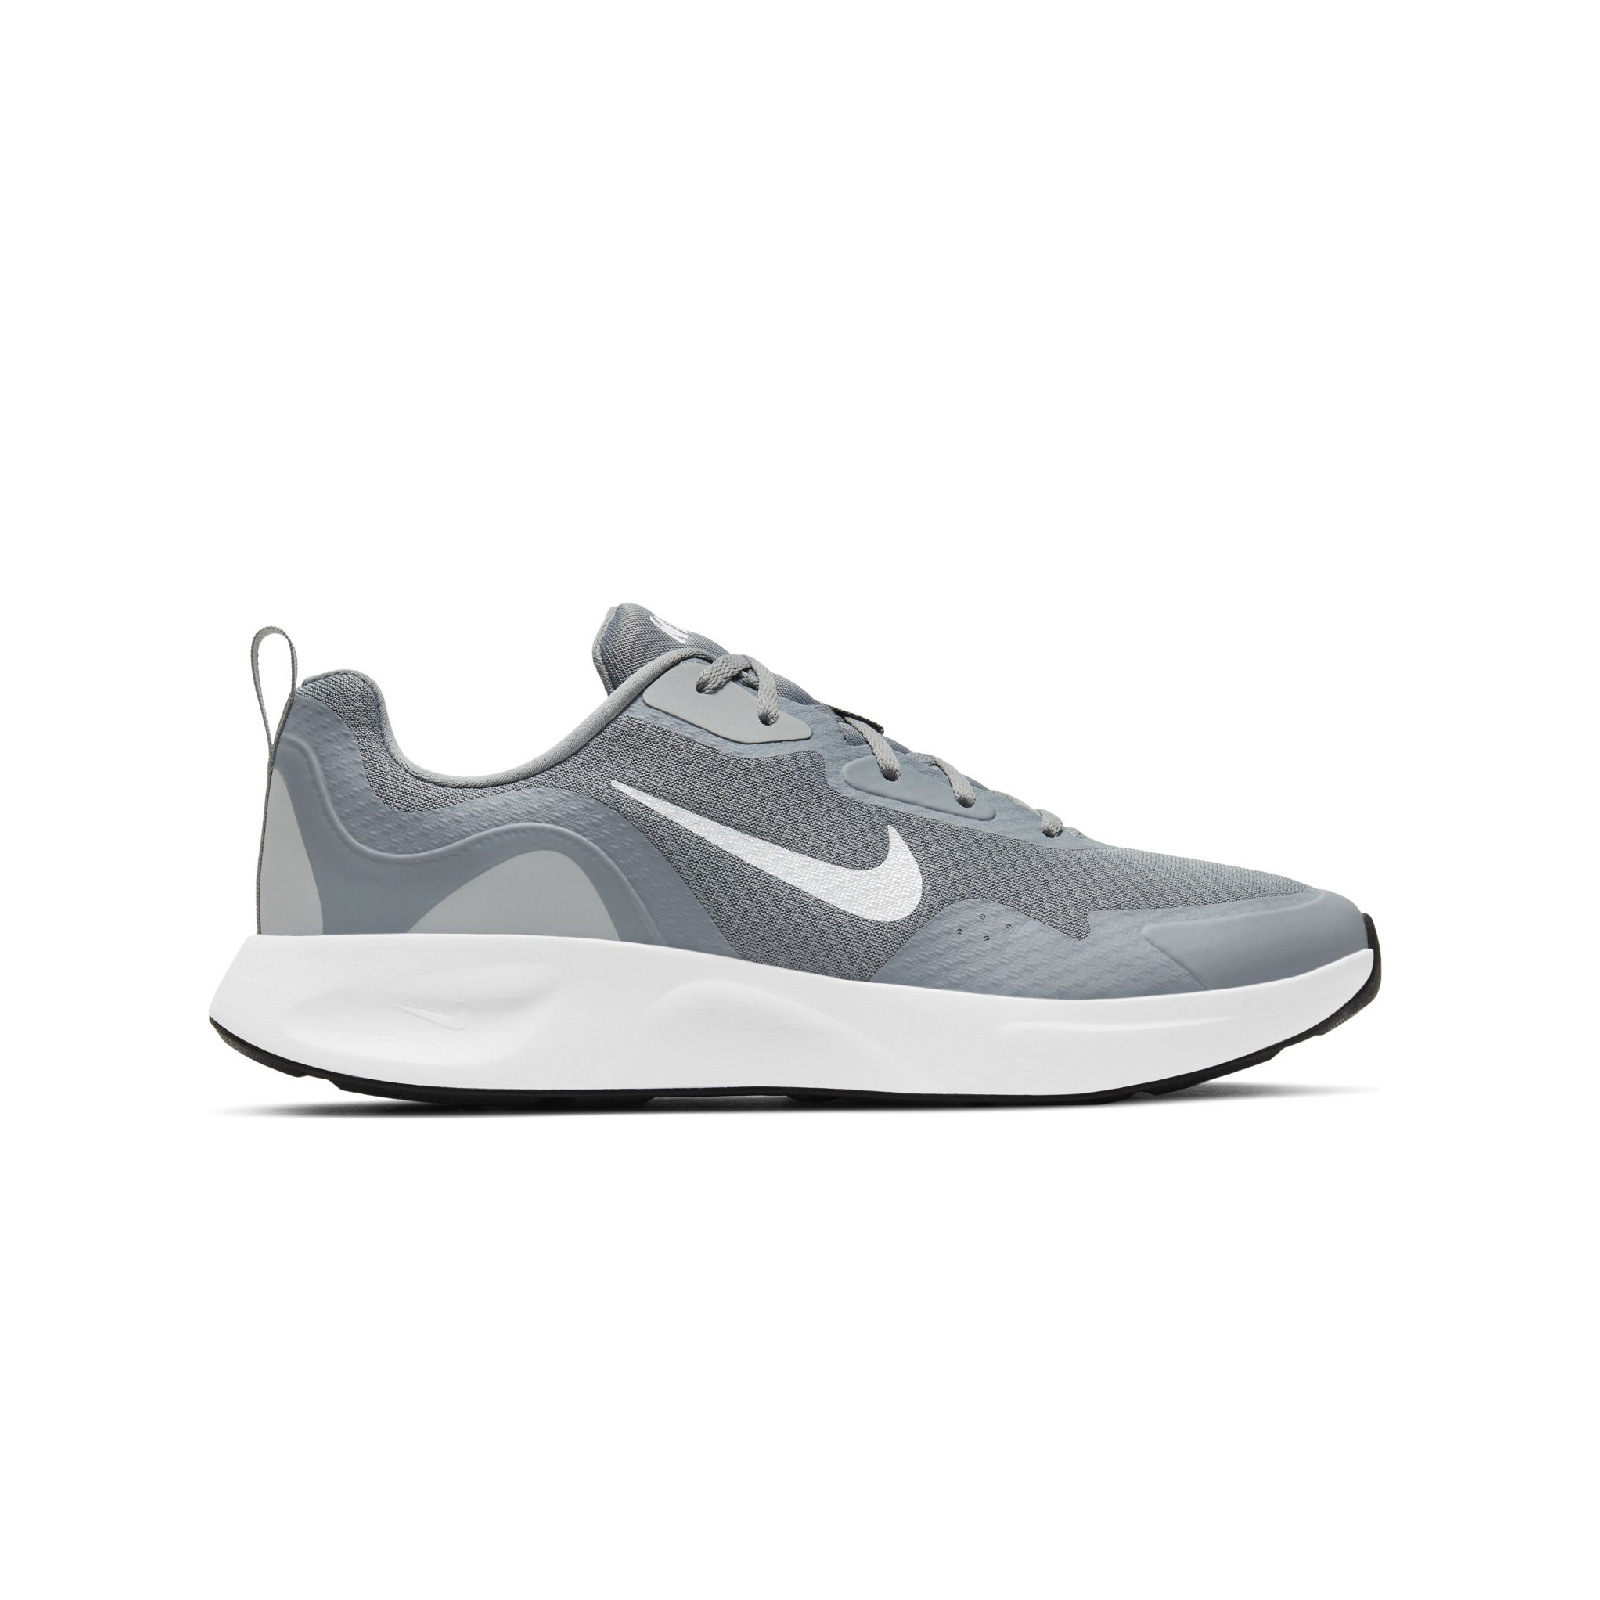 Nike - NIKE WEARALLDAY - PARTICLE GREY/WHITE-BLACK Ανδρικά > Παπούτσια > Sneaker > Παπούτσι Low Cut